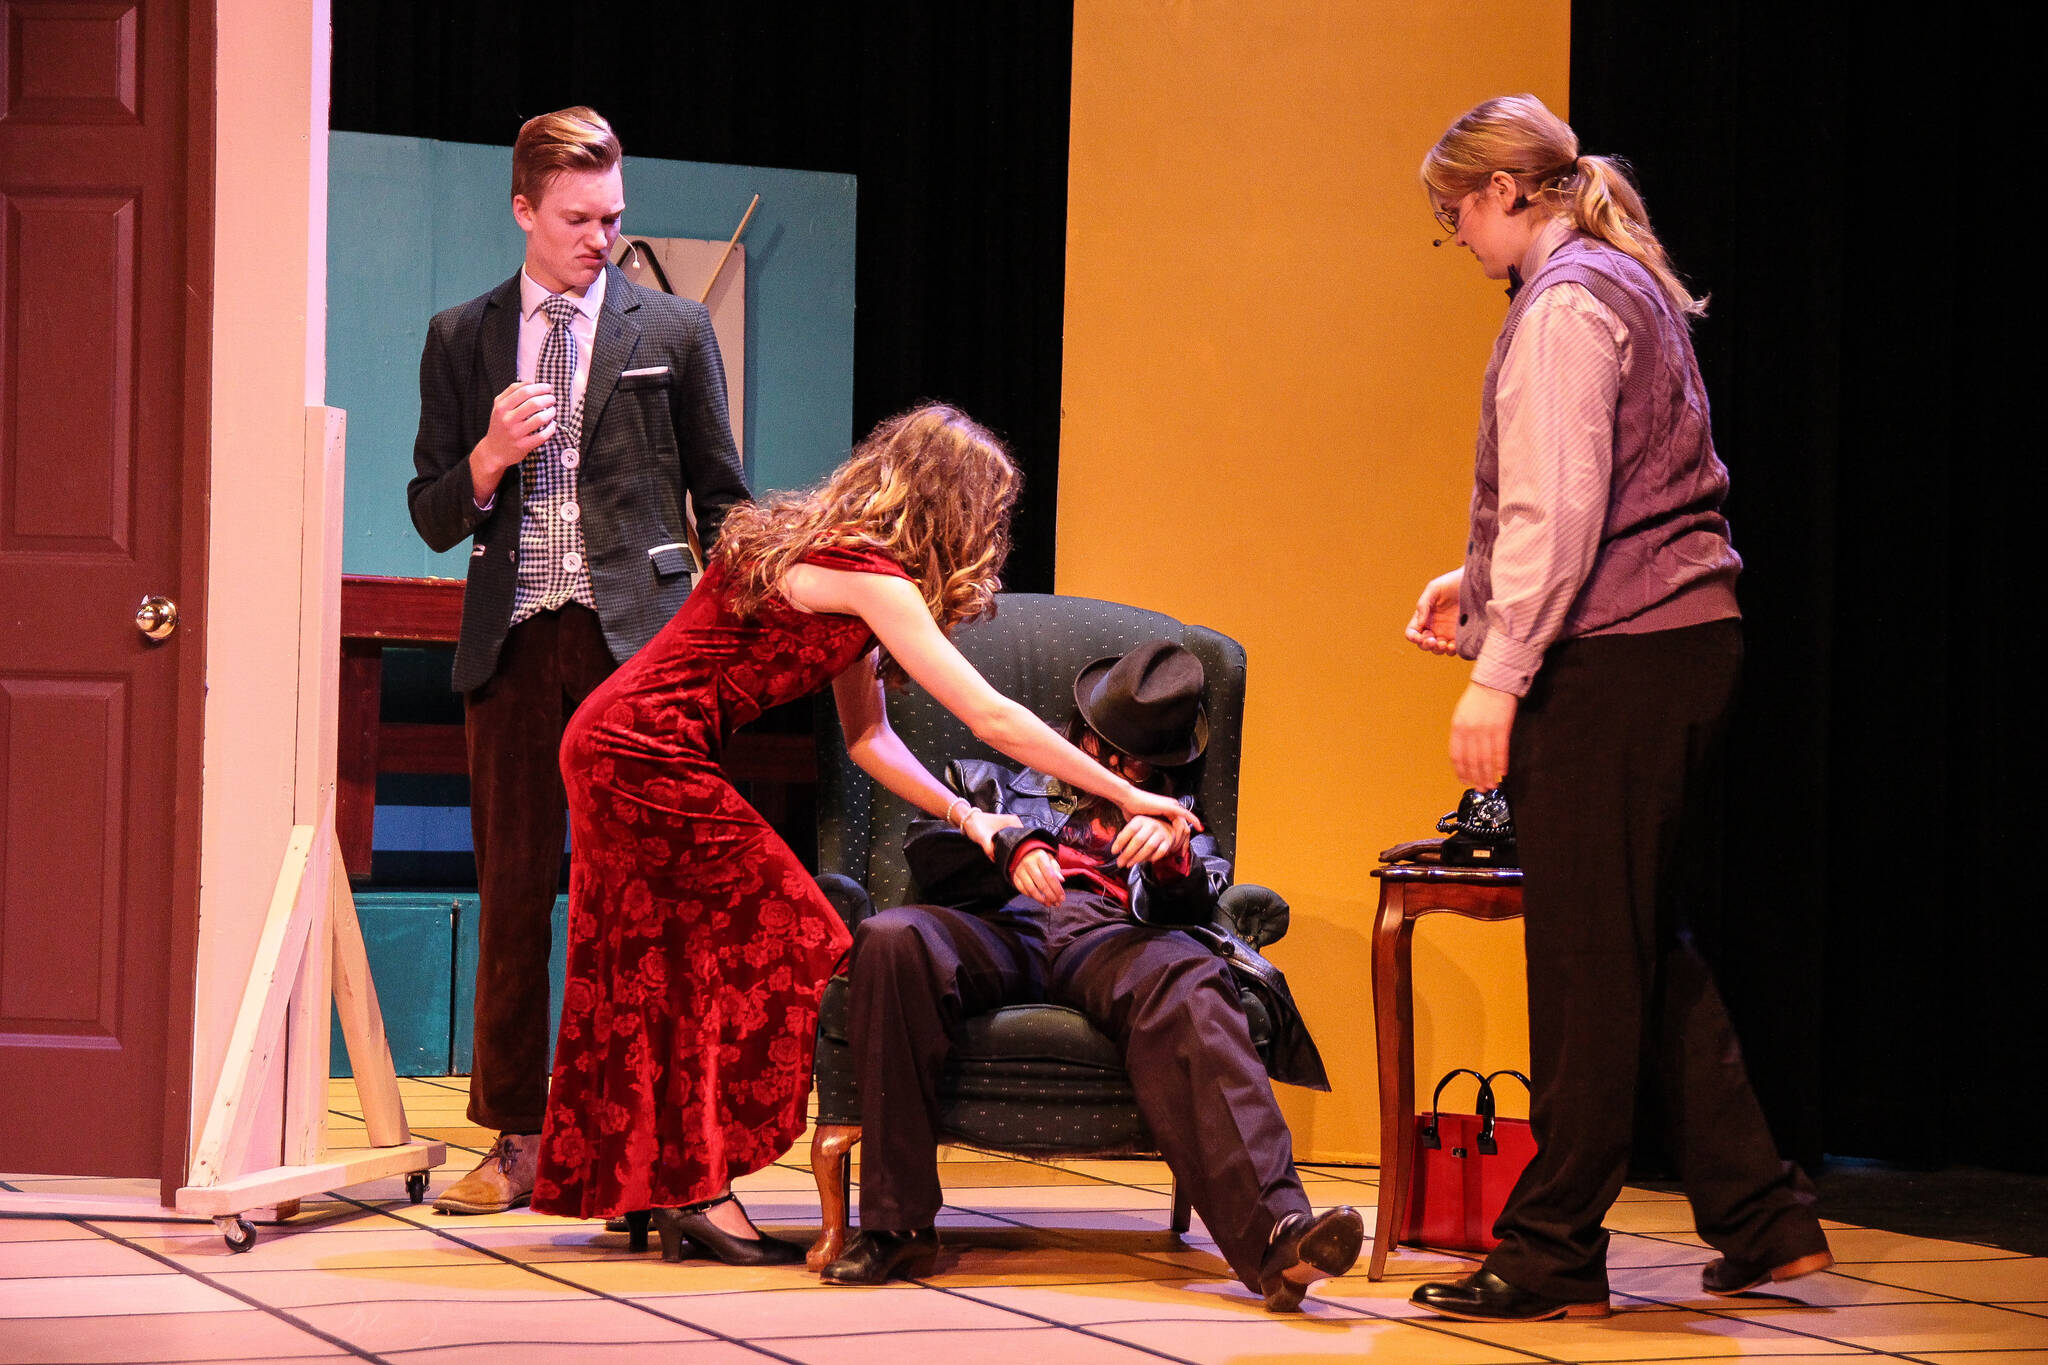 Mrs. Scarlet (Isabella Barbee) tries to make the dead motorist (Alyza Doctolero) look like she’s sleeping as Mr. Green (Asher Lemme, at left) and Professor Plum (Kincaid Cochran, at right) watch. (Photo by Luisa Loi)